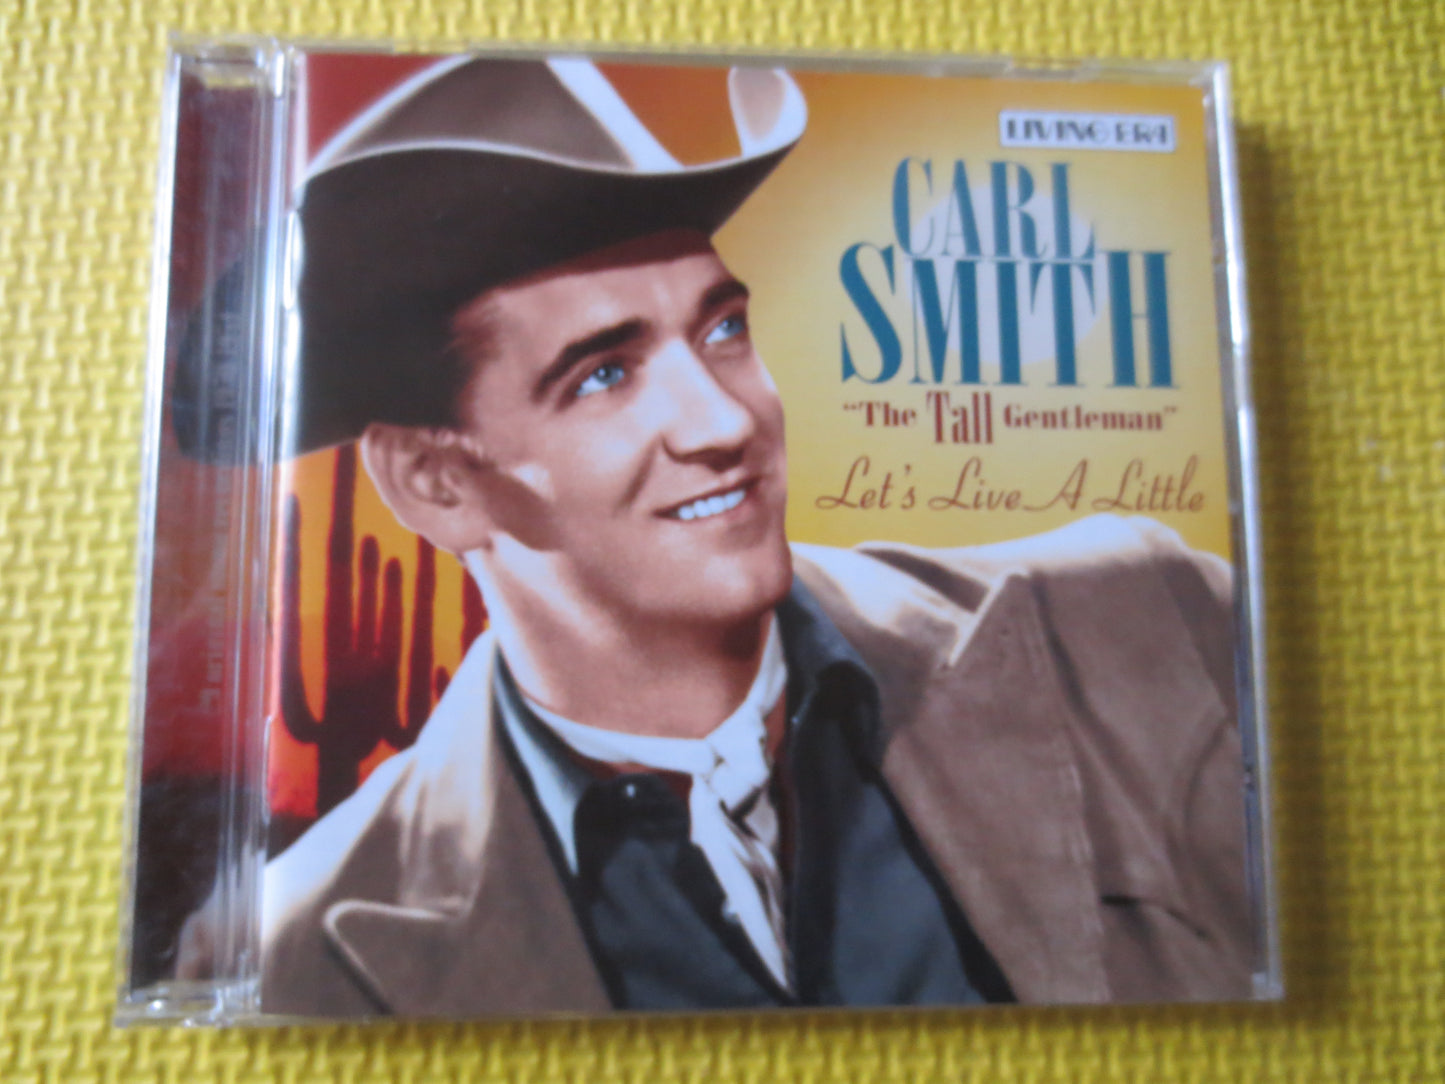 CARL SMITH, The TALL Gentleman, Carl Smith Cd, Carl Smith Album, Carl Smith Songs, Country Cds, Classic Country Cd, Country Lp